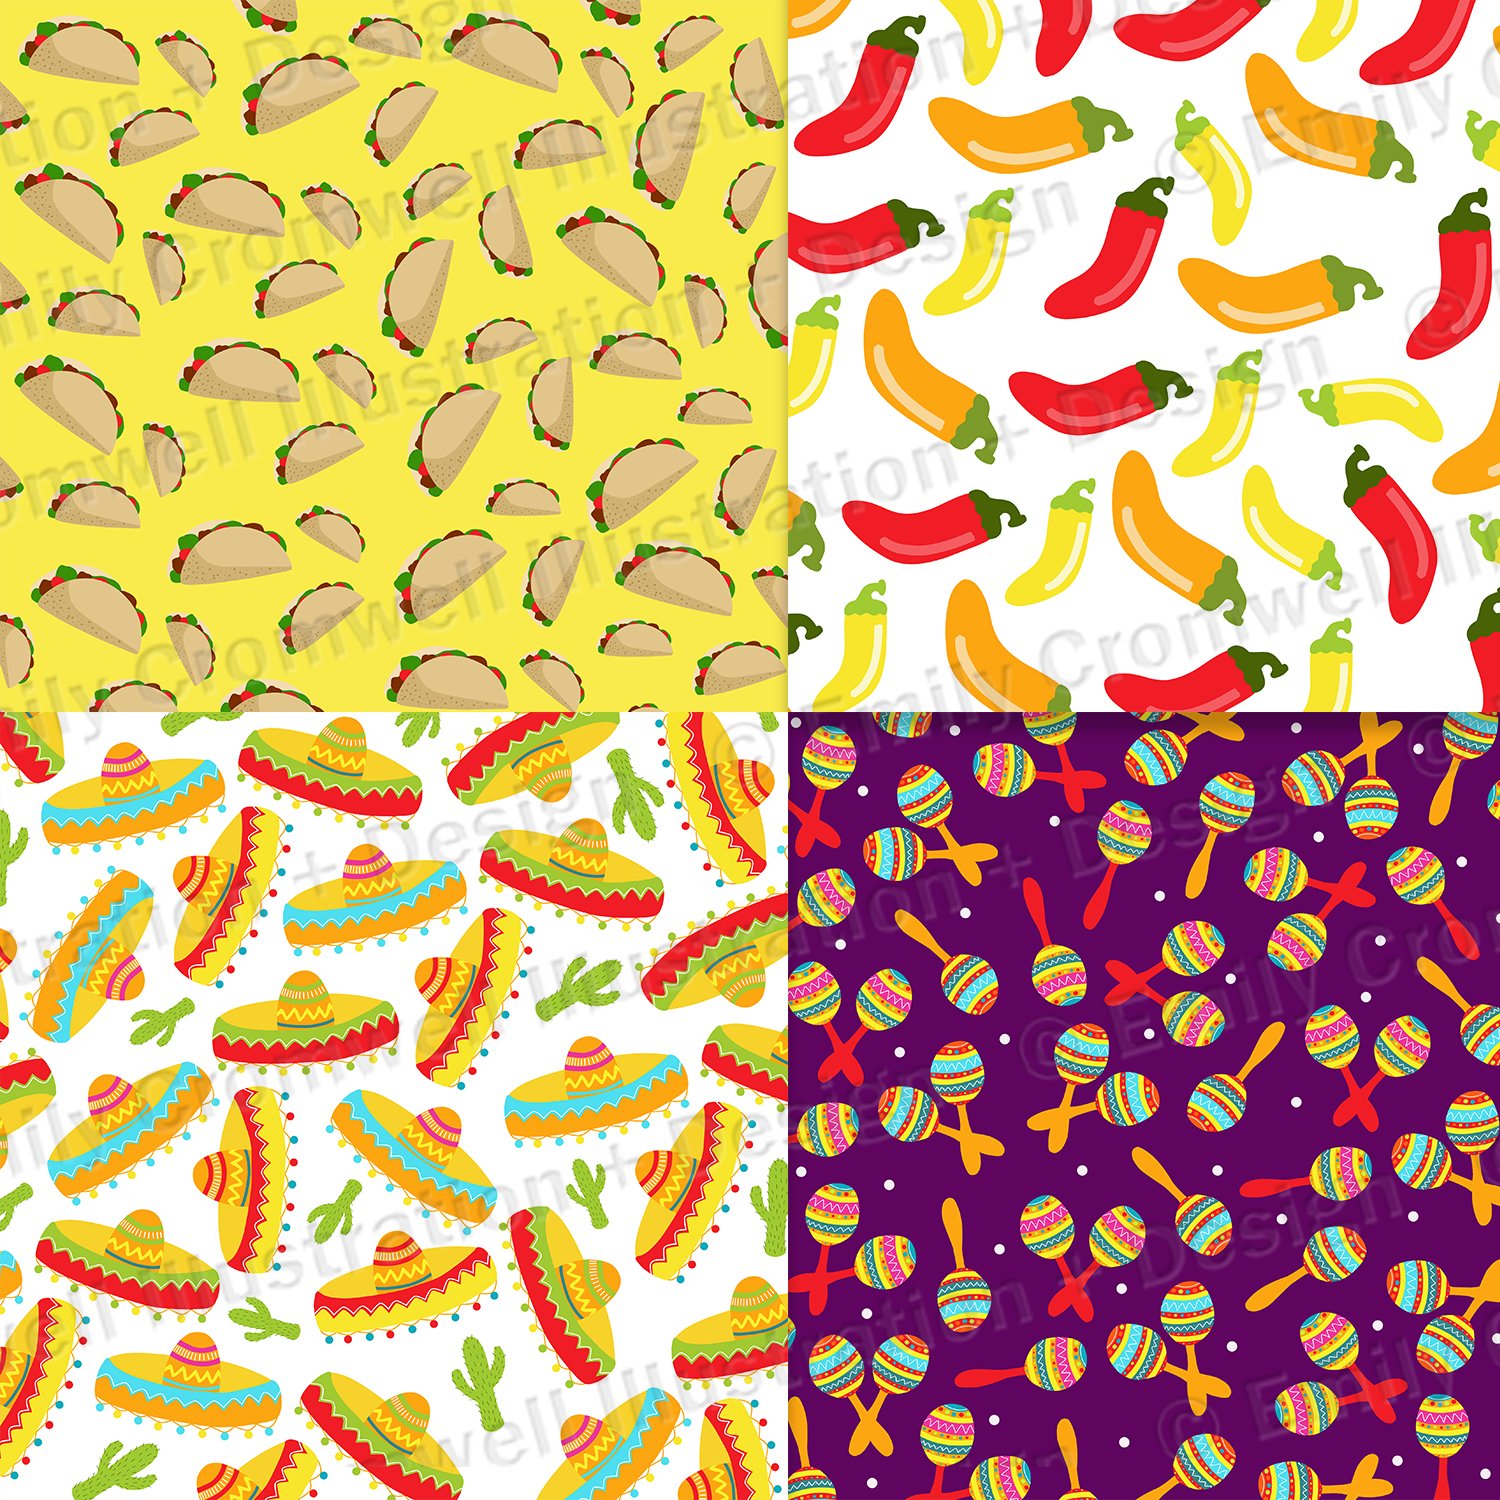 Some spicy elements on the multicolor patterns.